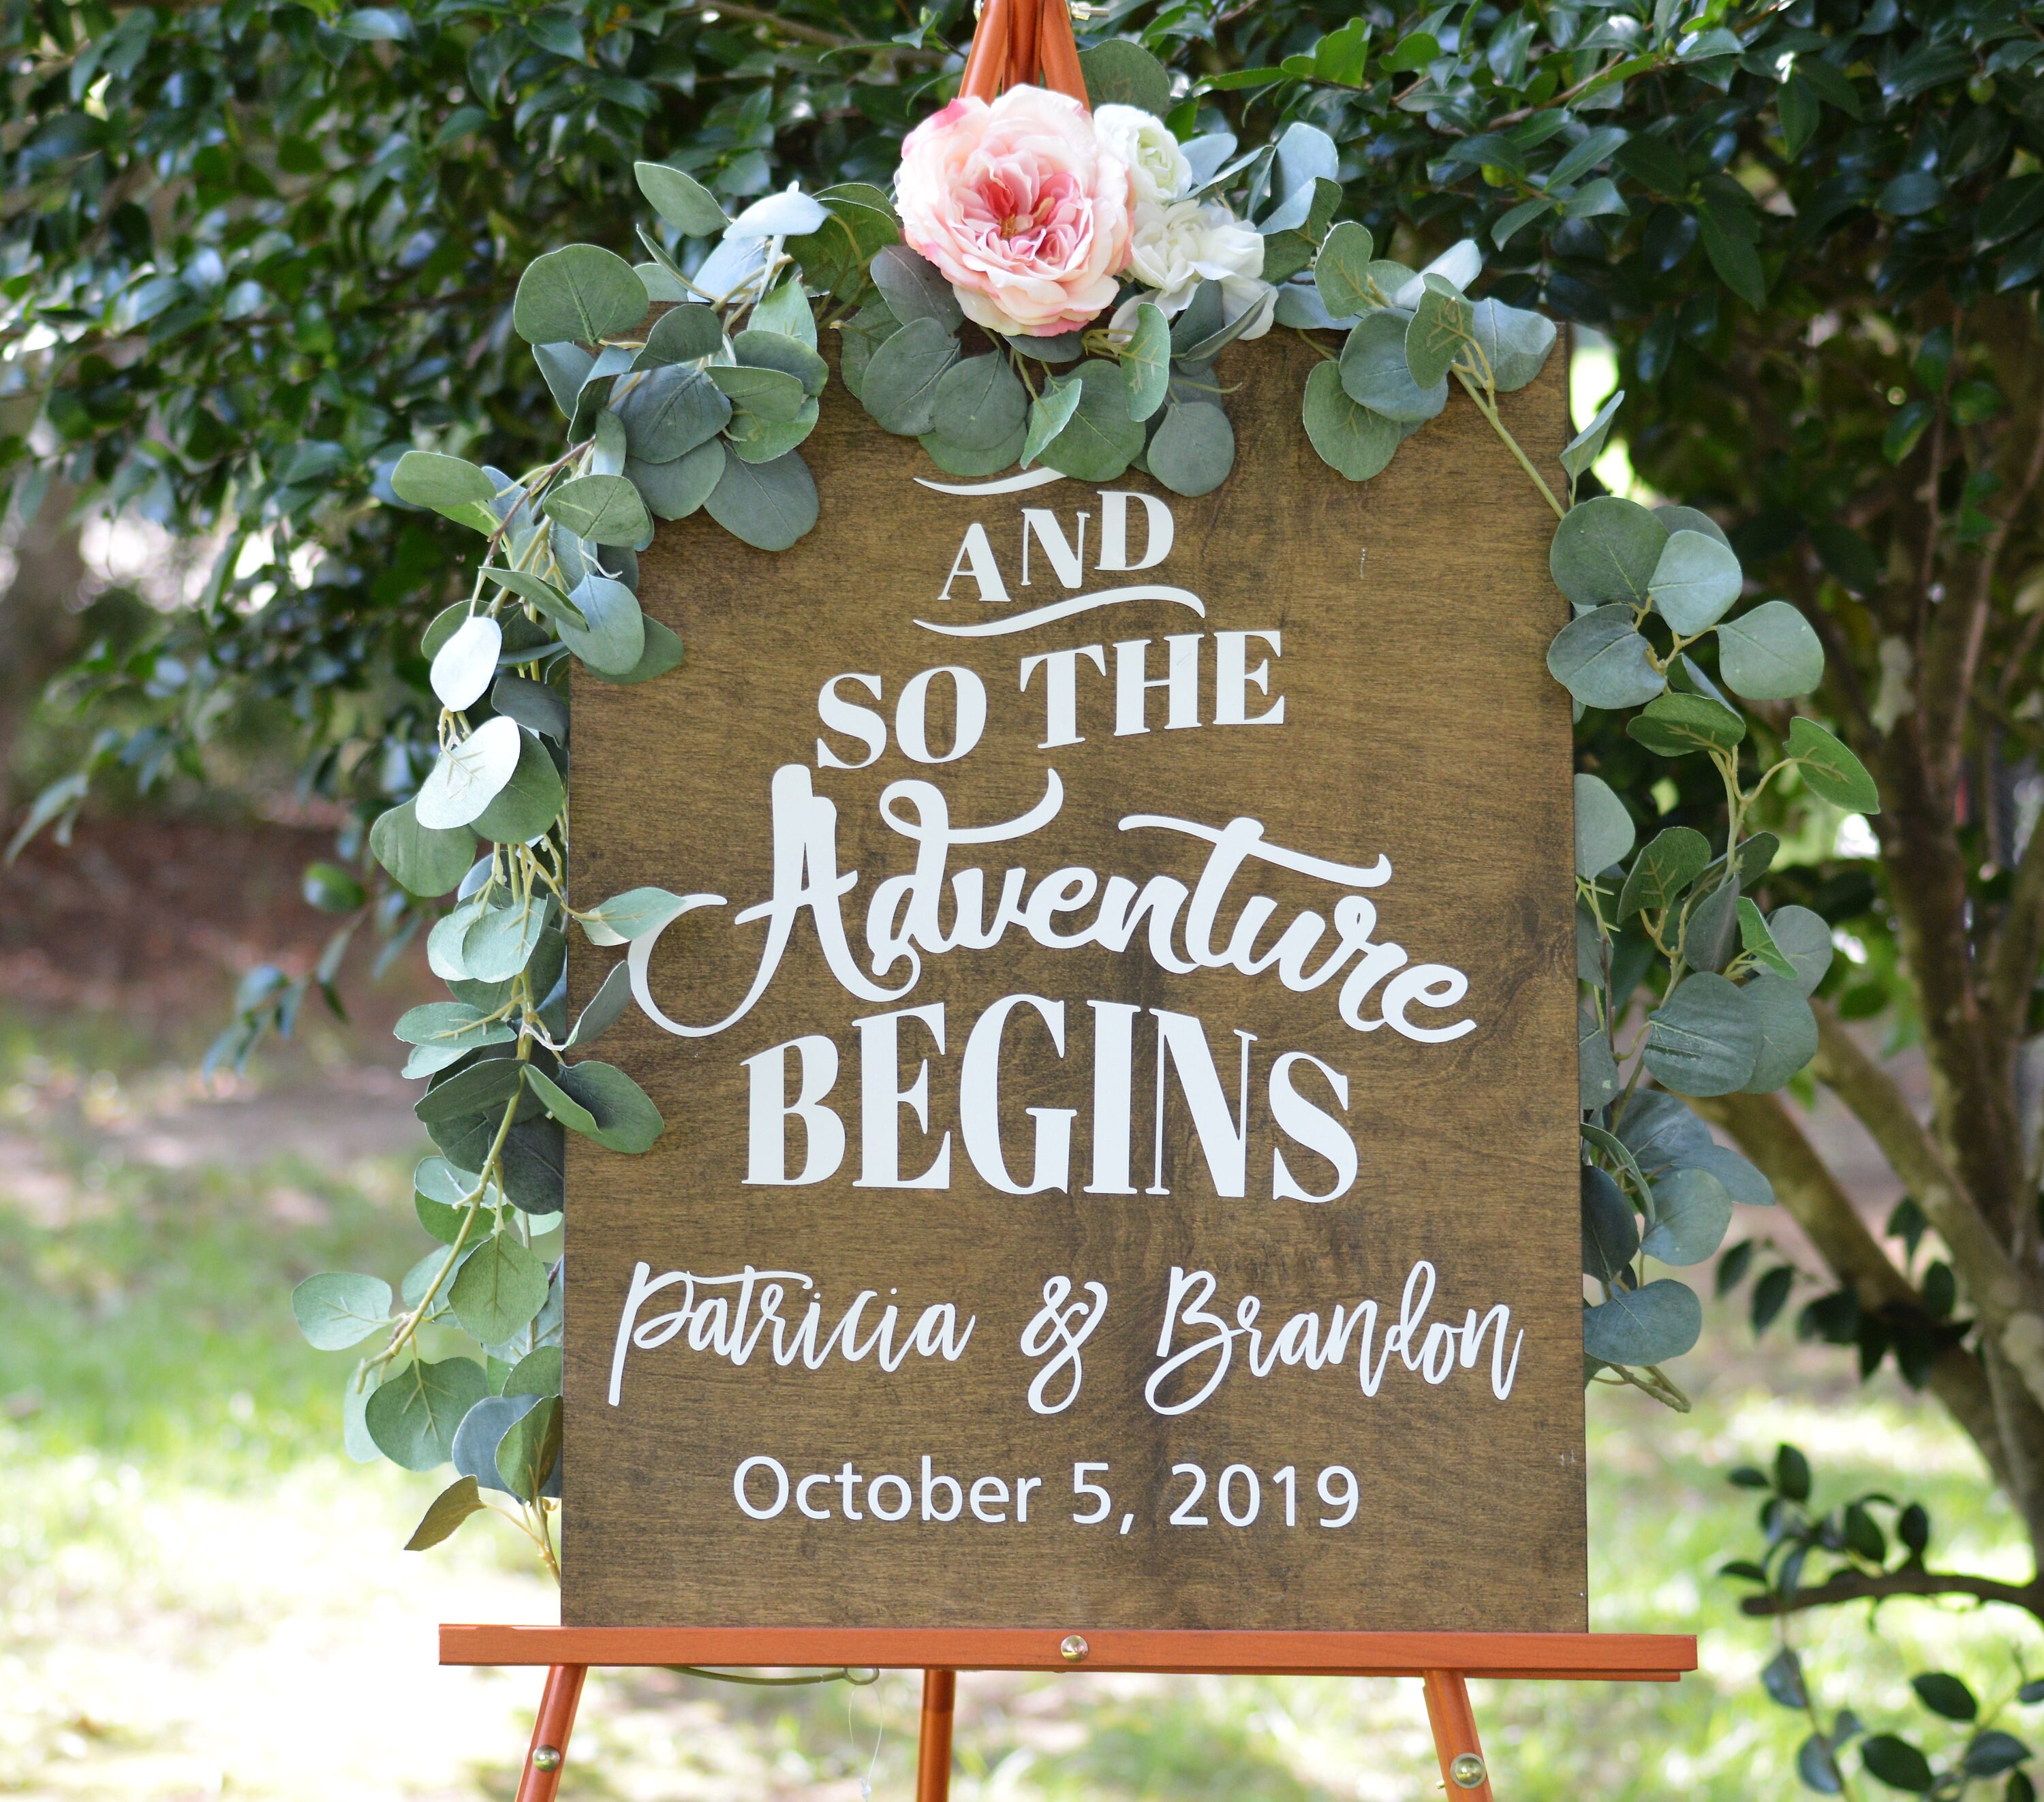 wedding print the adventure begins Wedding sign Wedding decor wedding poster Welcome to our wedding would be wedding